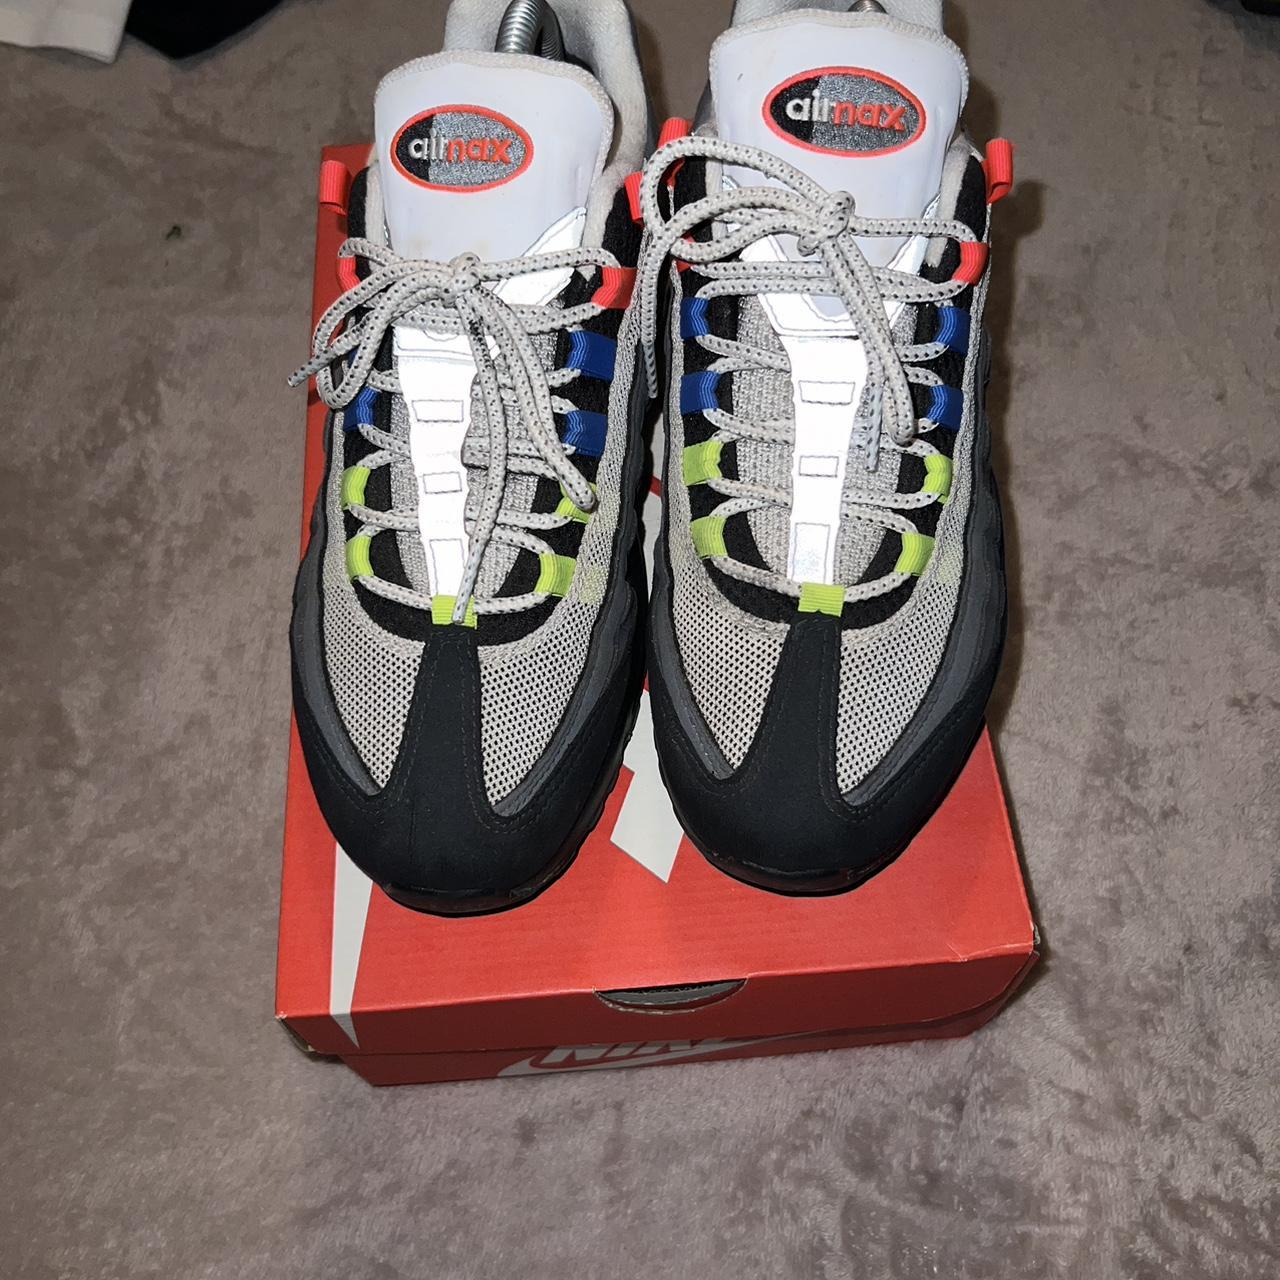 Nike air max 95 greedy 3.0 Good condition Size 6.5 - Depop